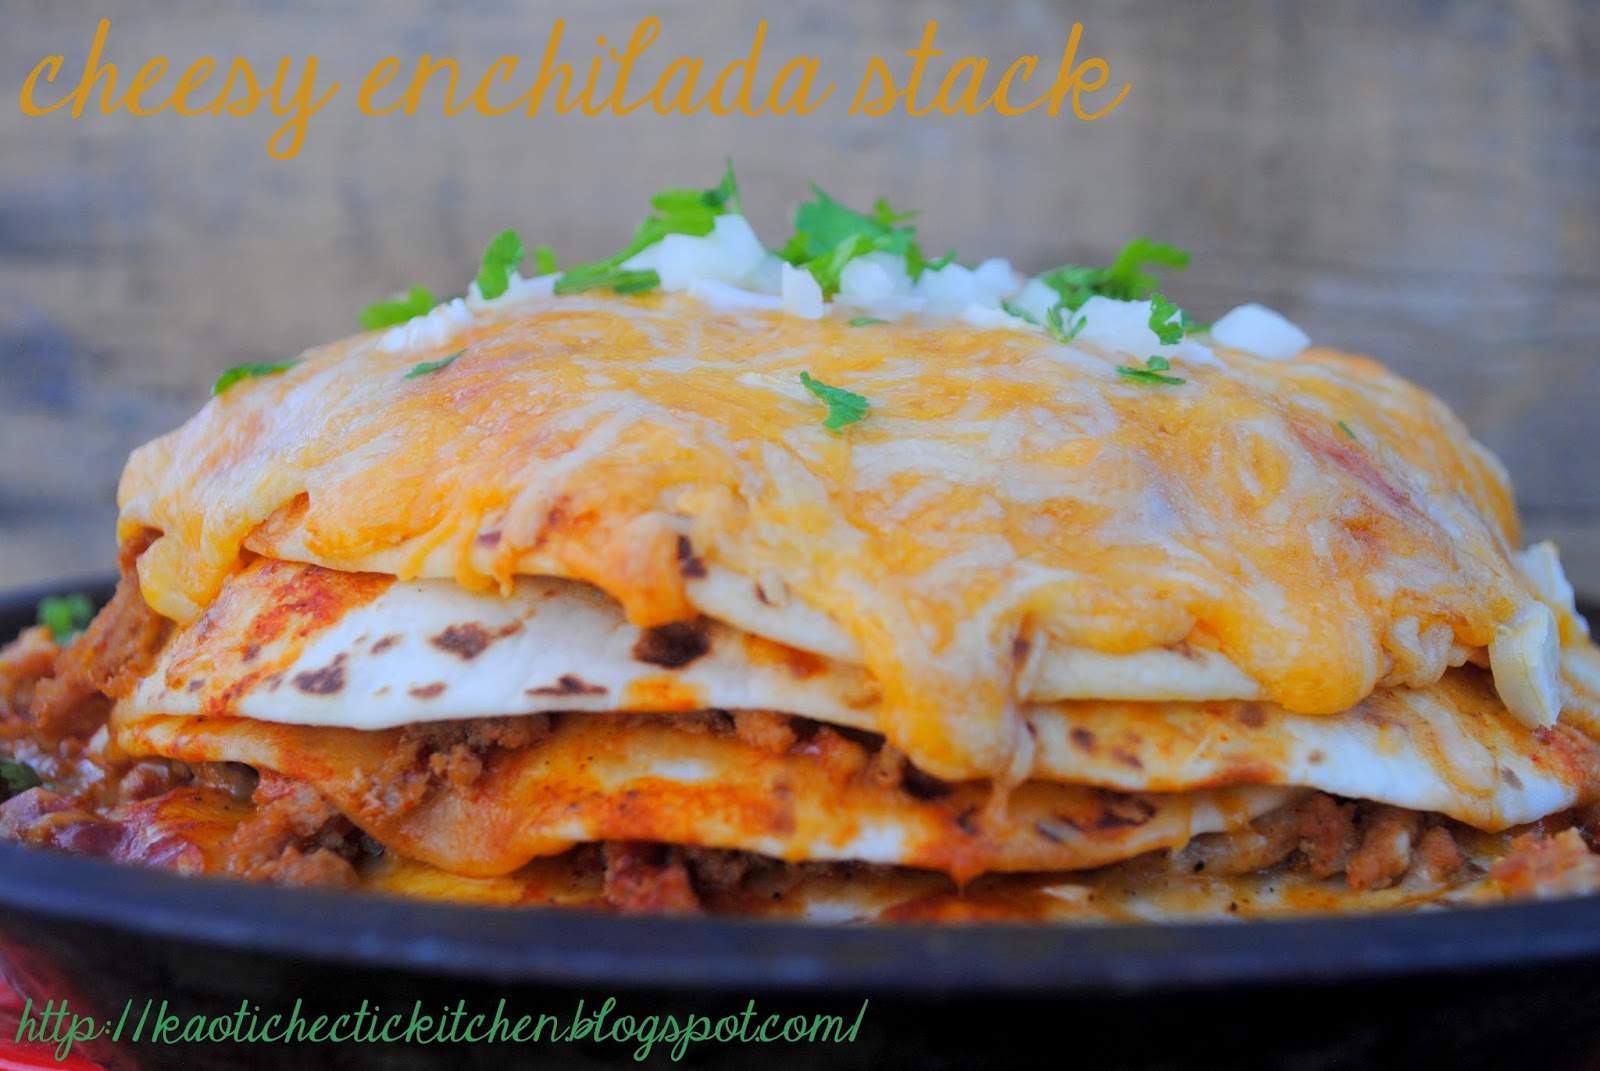 throwback thursday.. enchilada stack with a creamy jalapeno sauce..